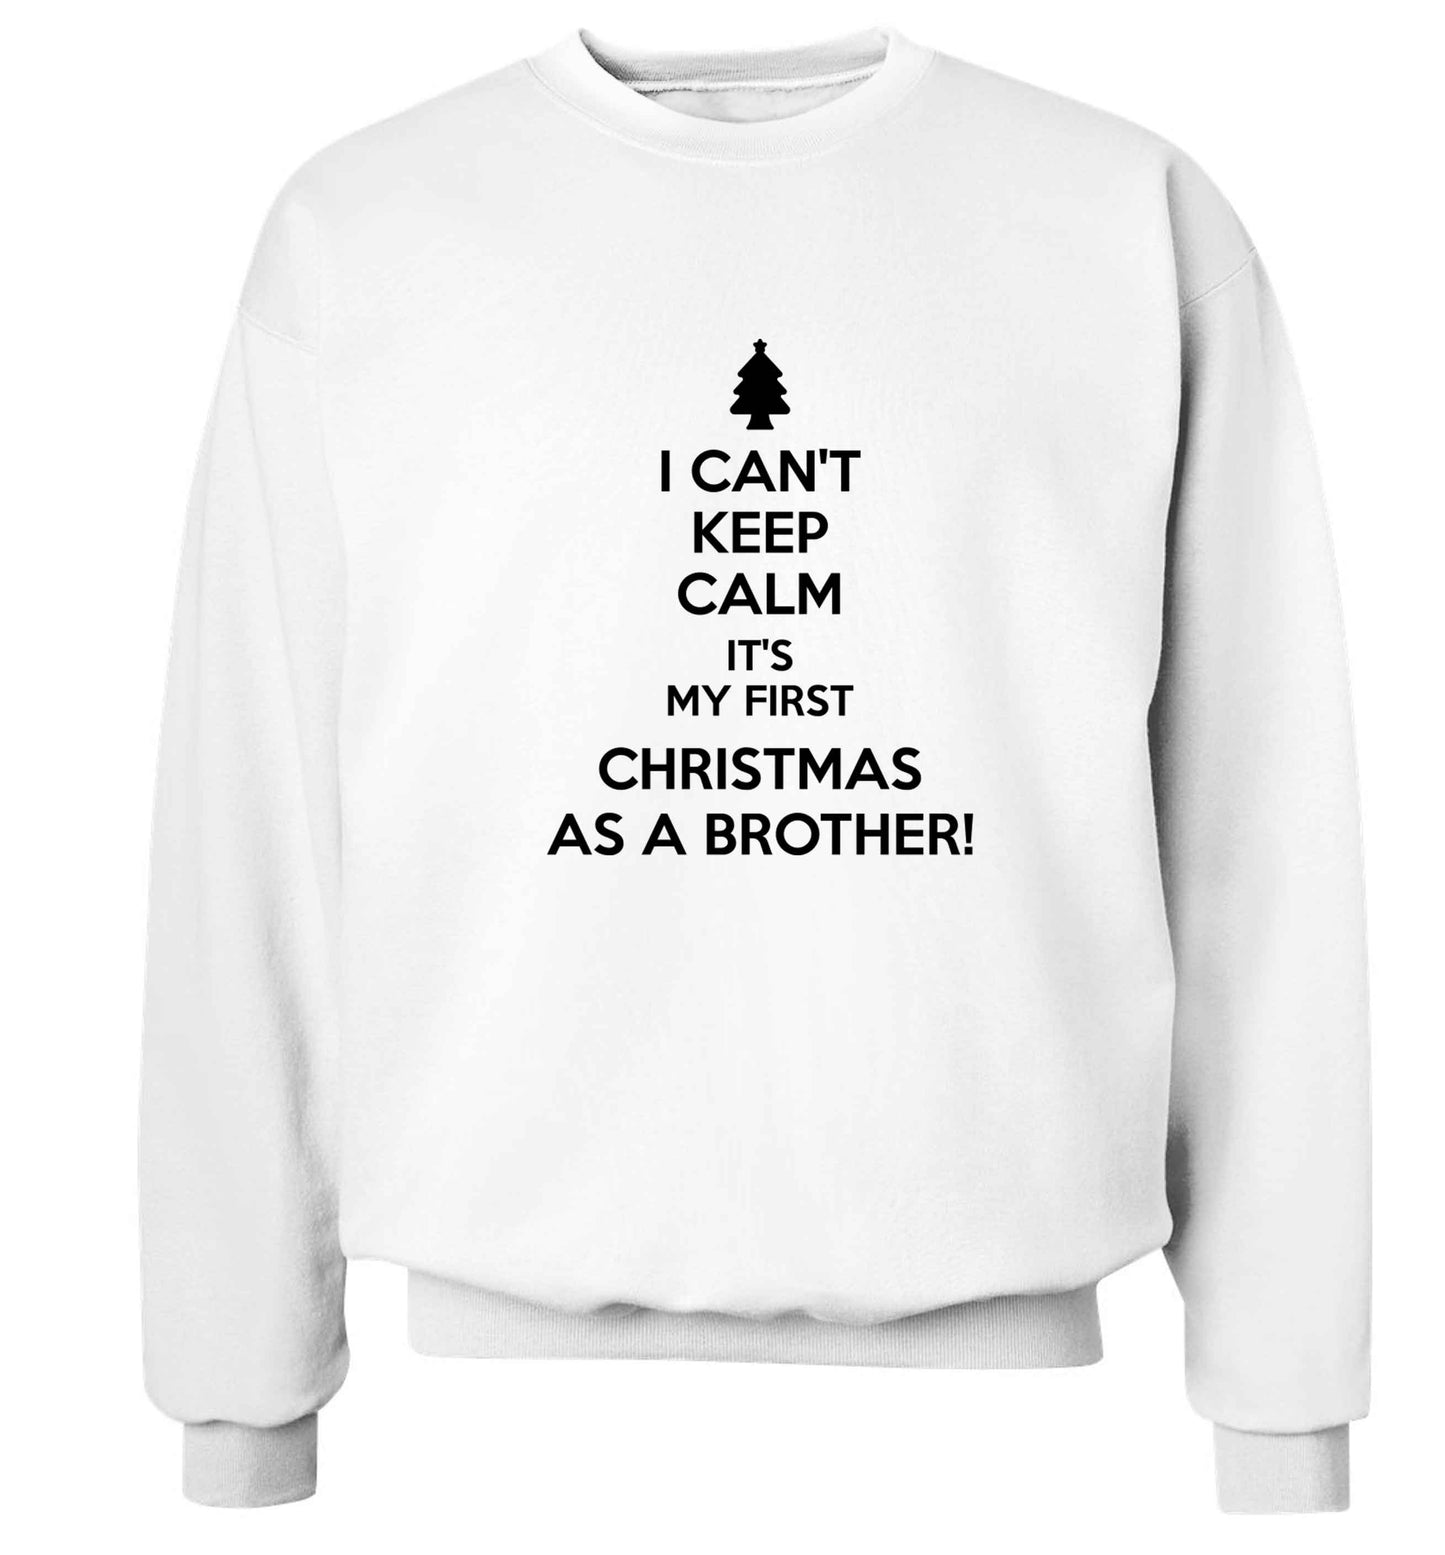 I can't keep calm it's my first Christmas as a brother! Adult's unisex white Sweater 2XL